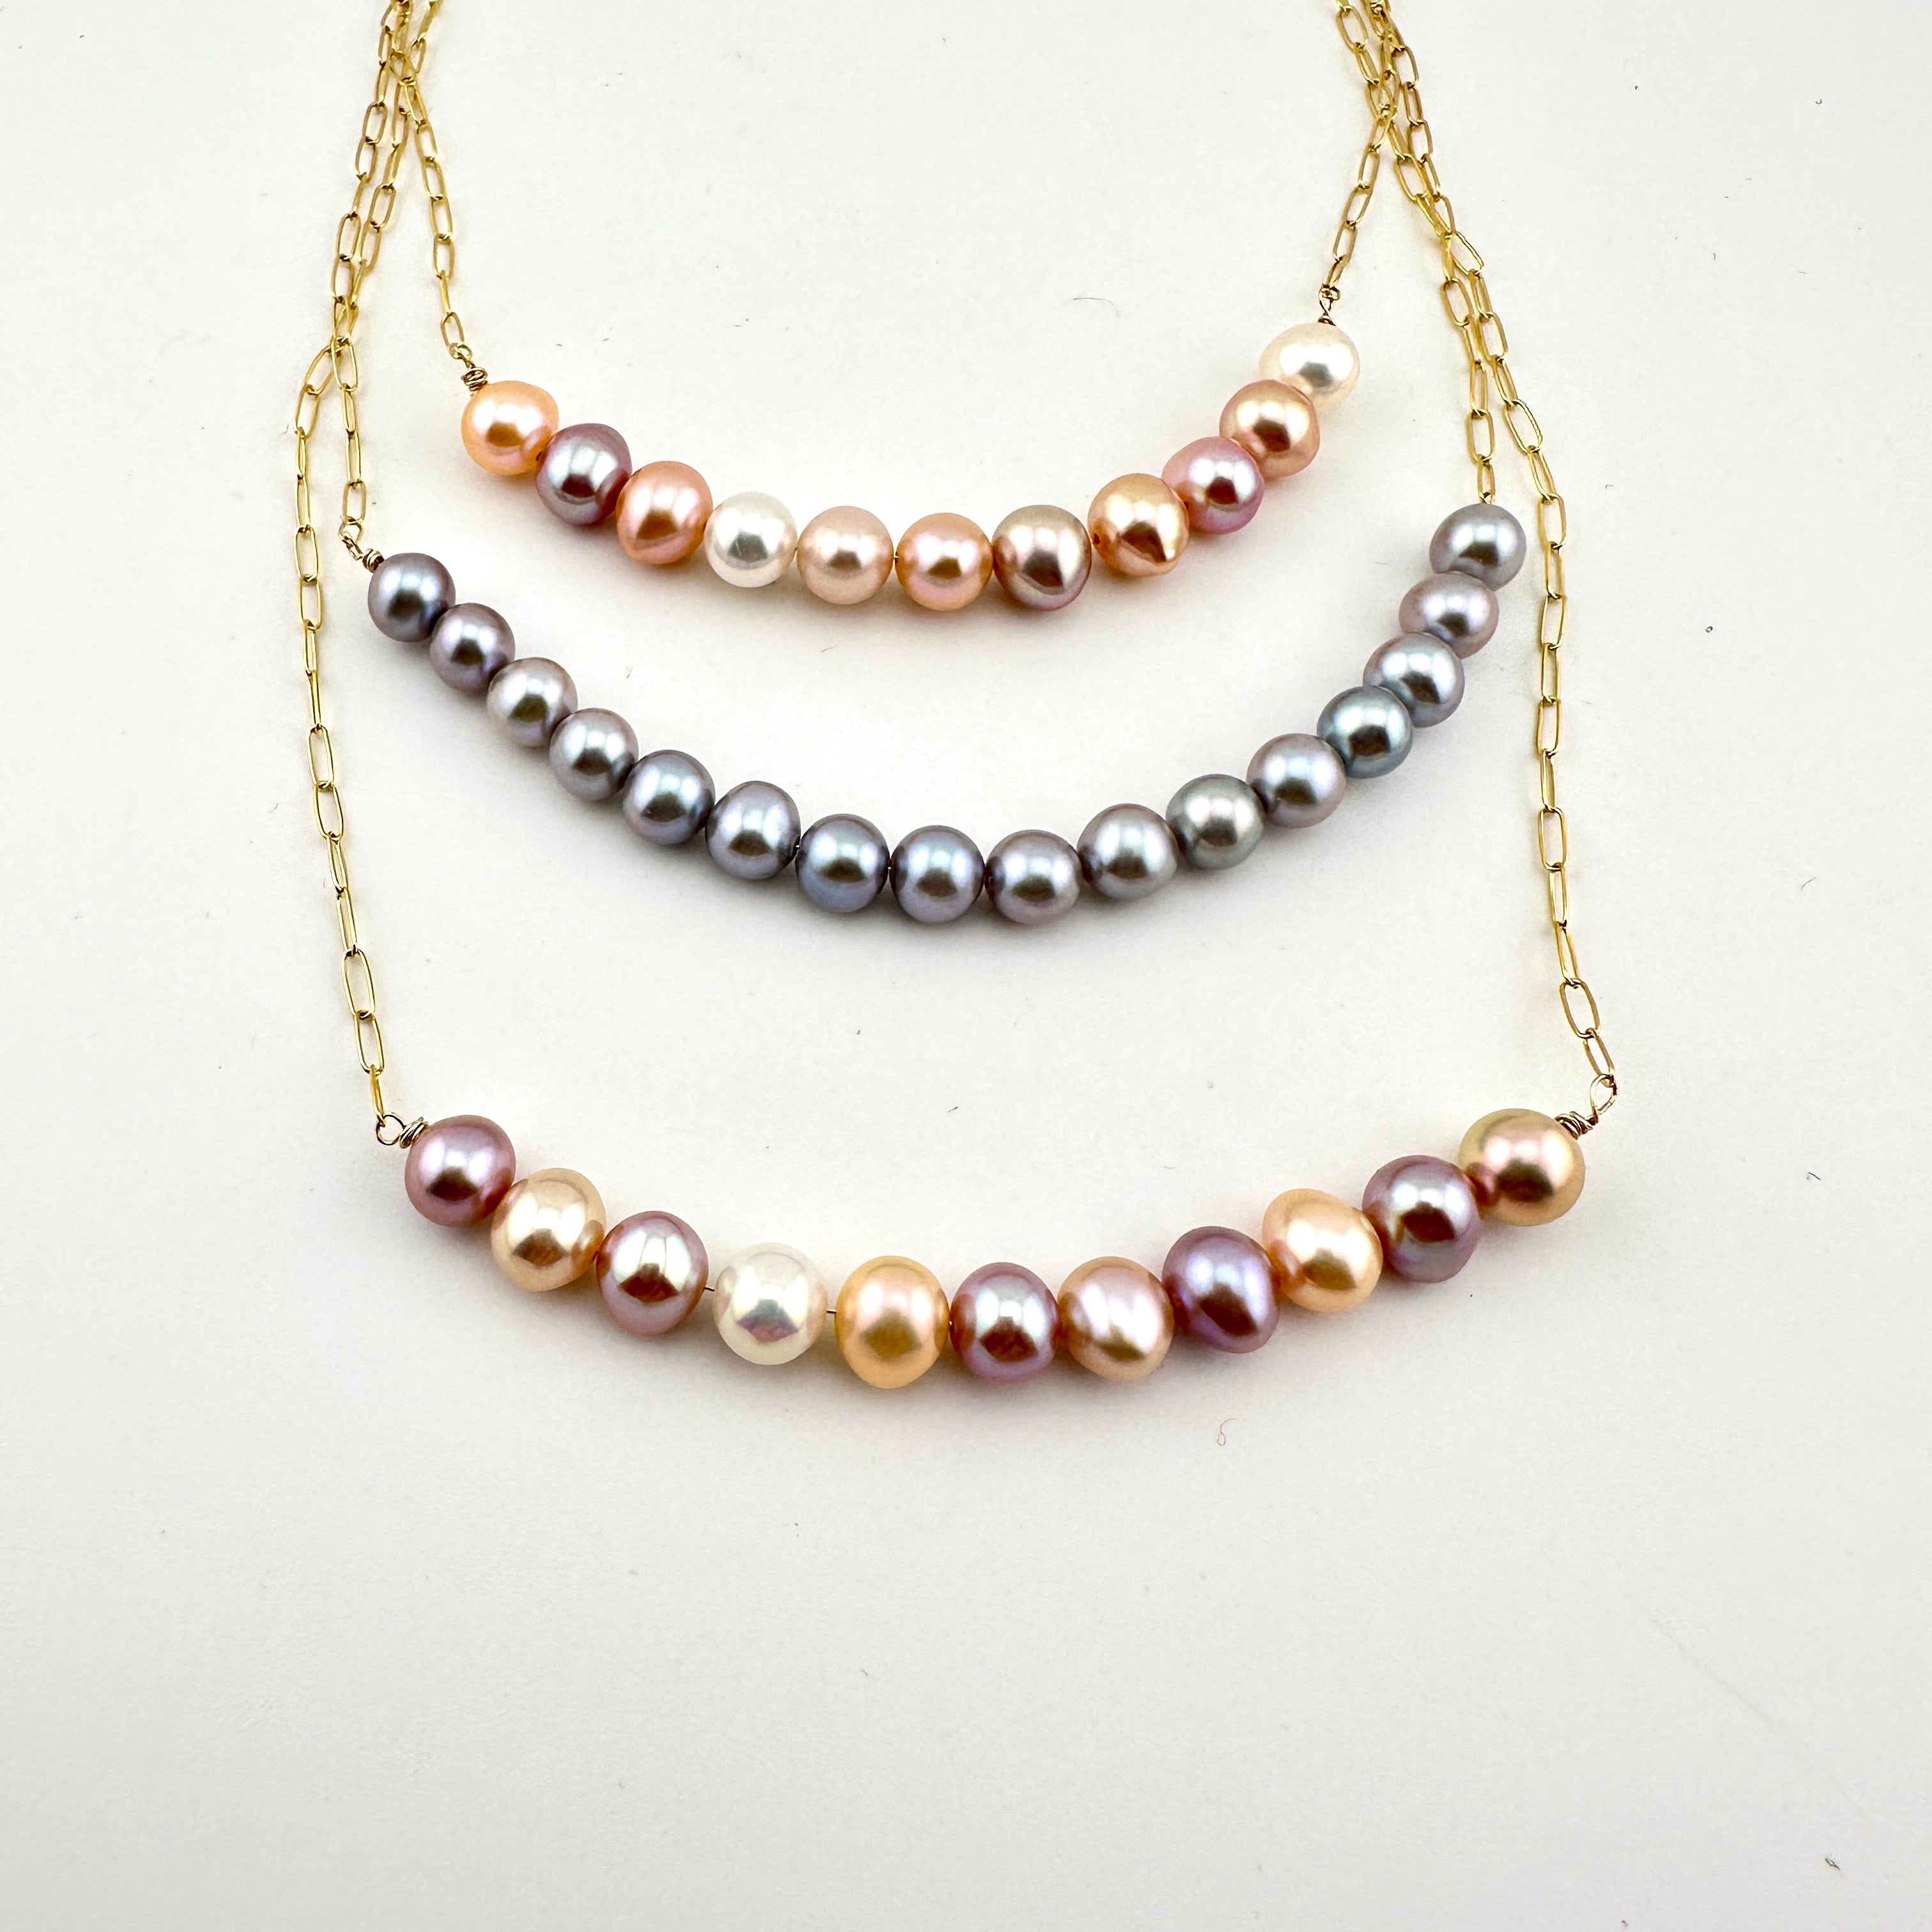 Pastel colors pearl necklacee | Stefan Otter Jewelry